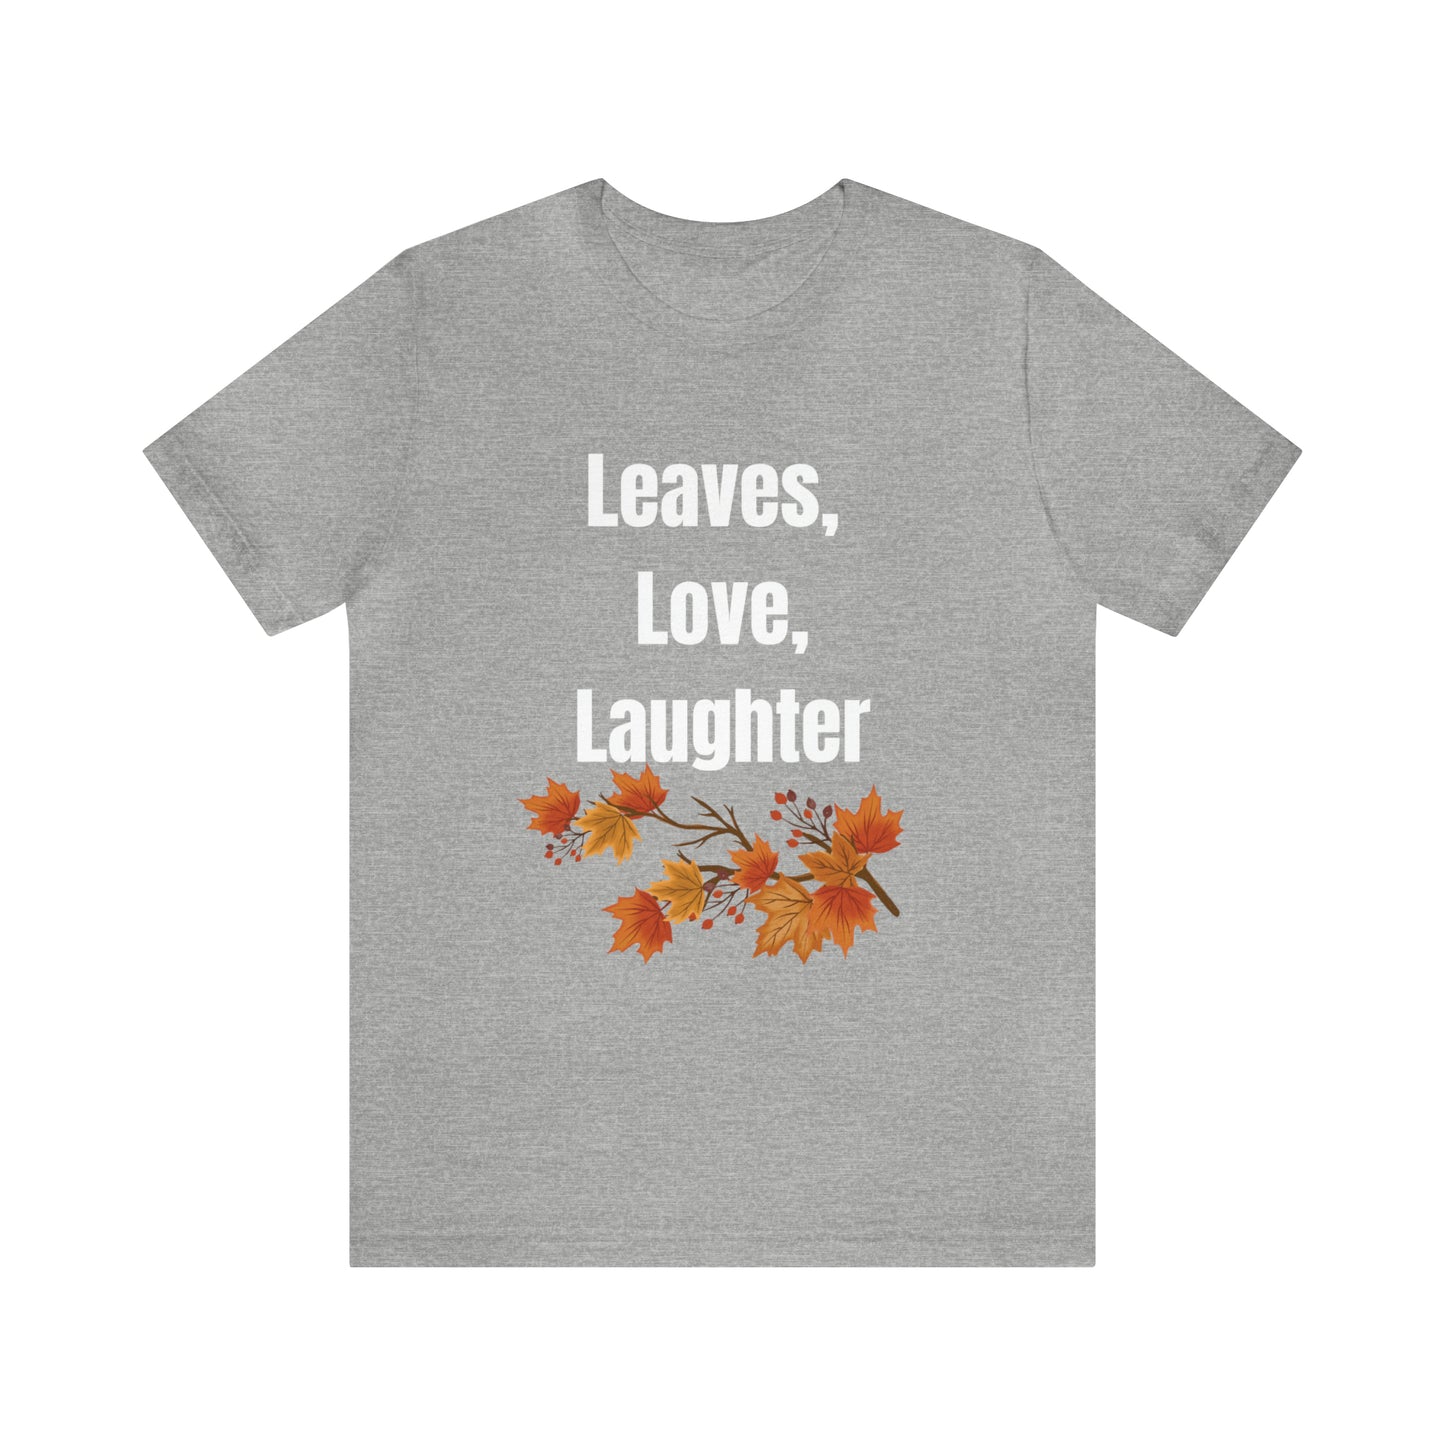 T-Shirt Tshirt Design Gift for Friend and Family Short Sleeved Shirt Fall Casual Petrova Designs